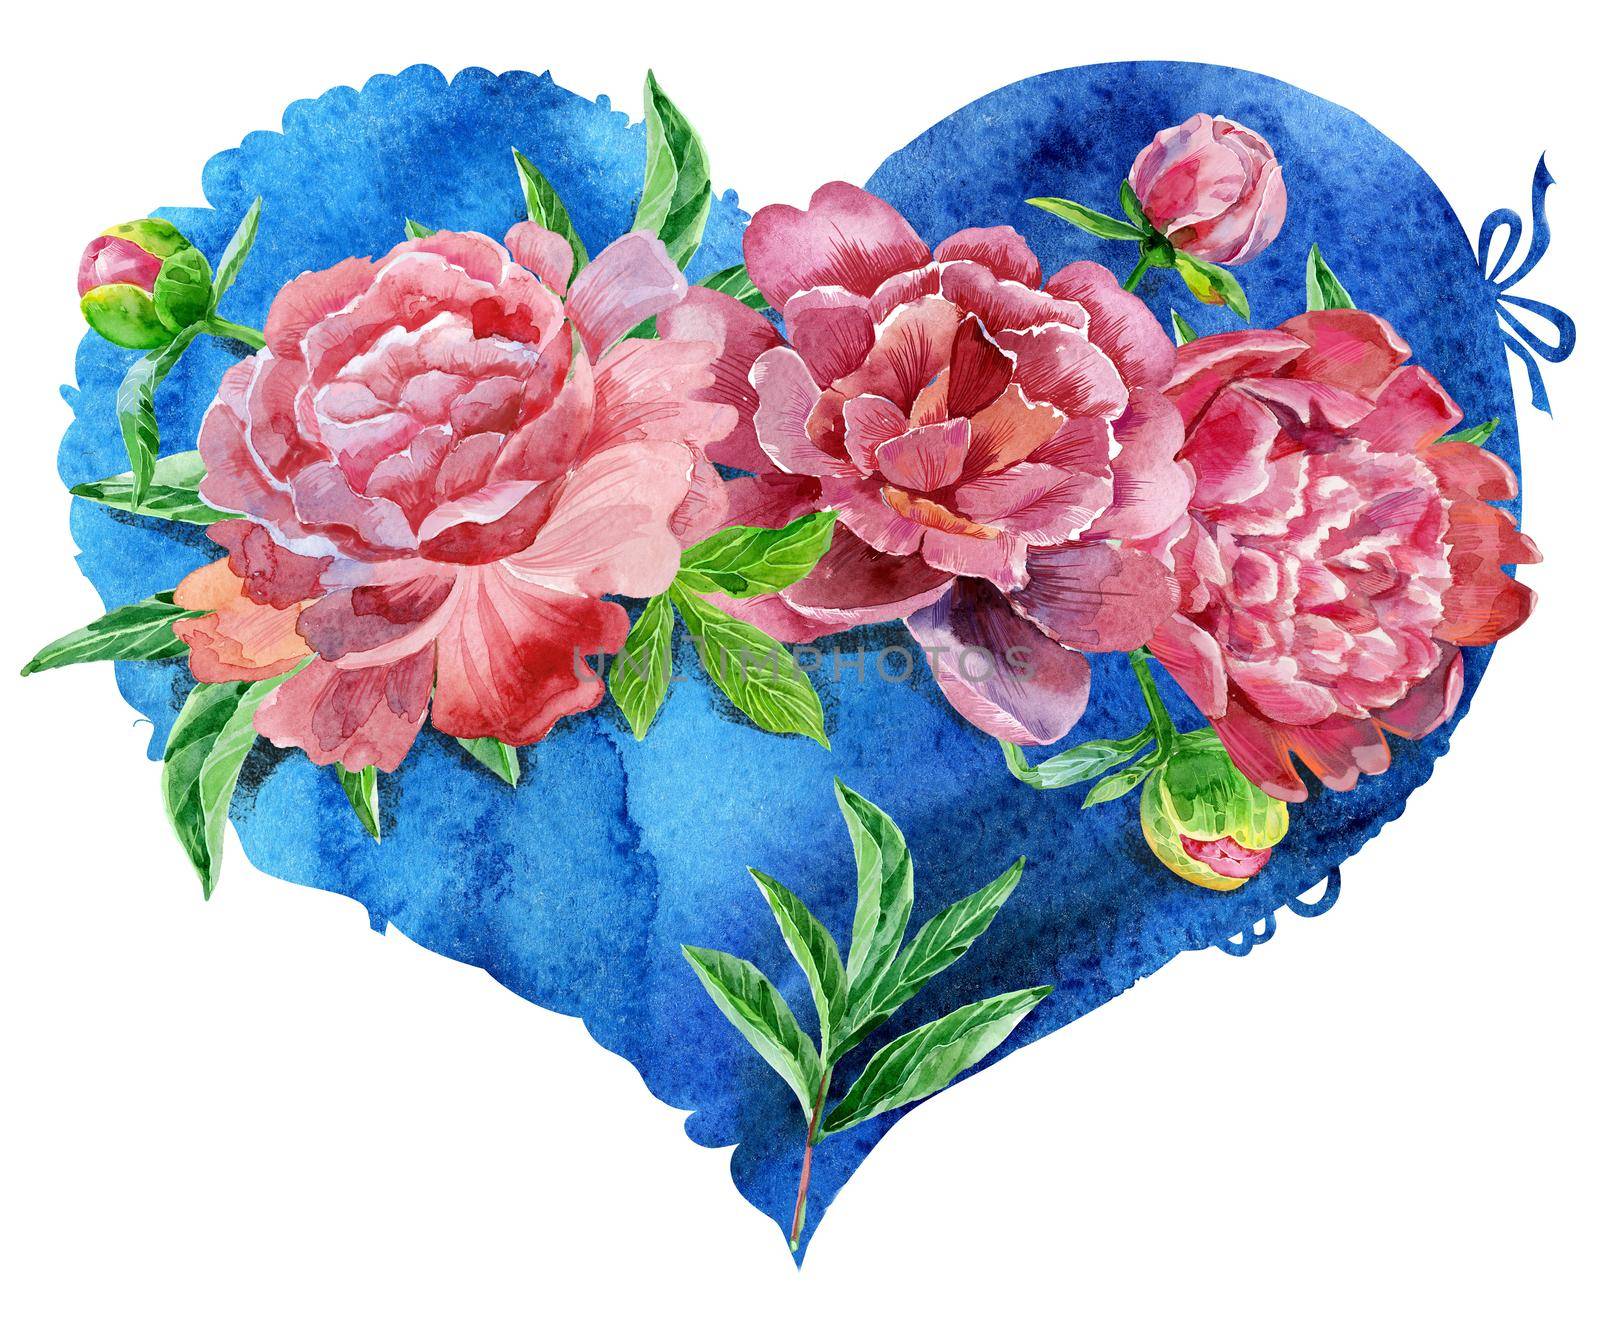 watercolor blue heart with red peonies, painted by hand